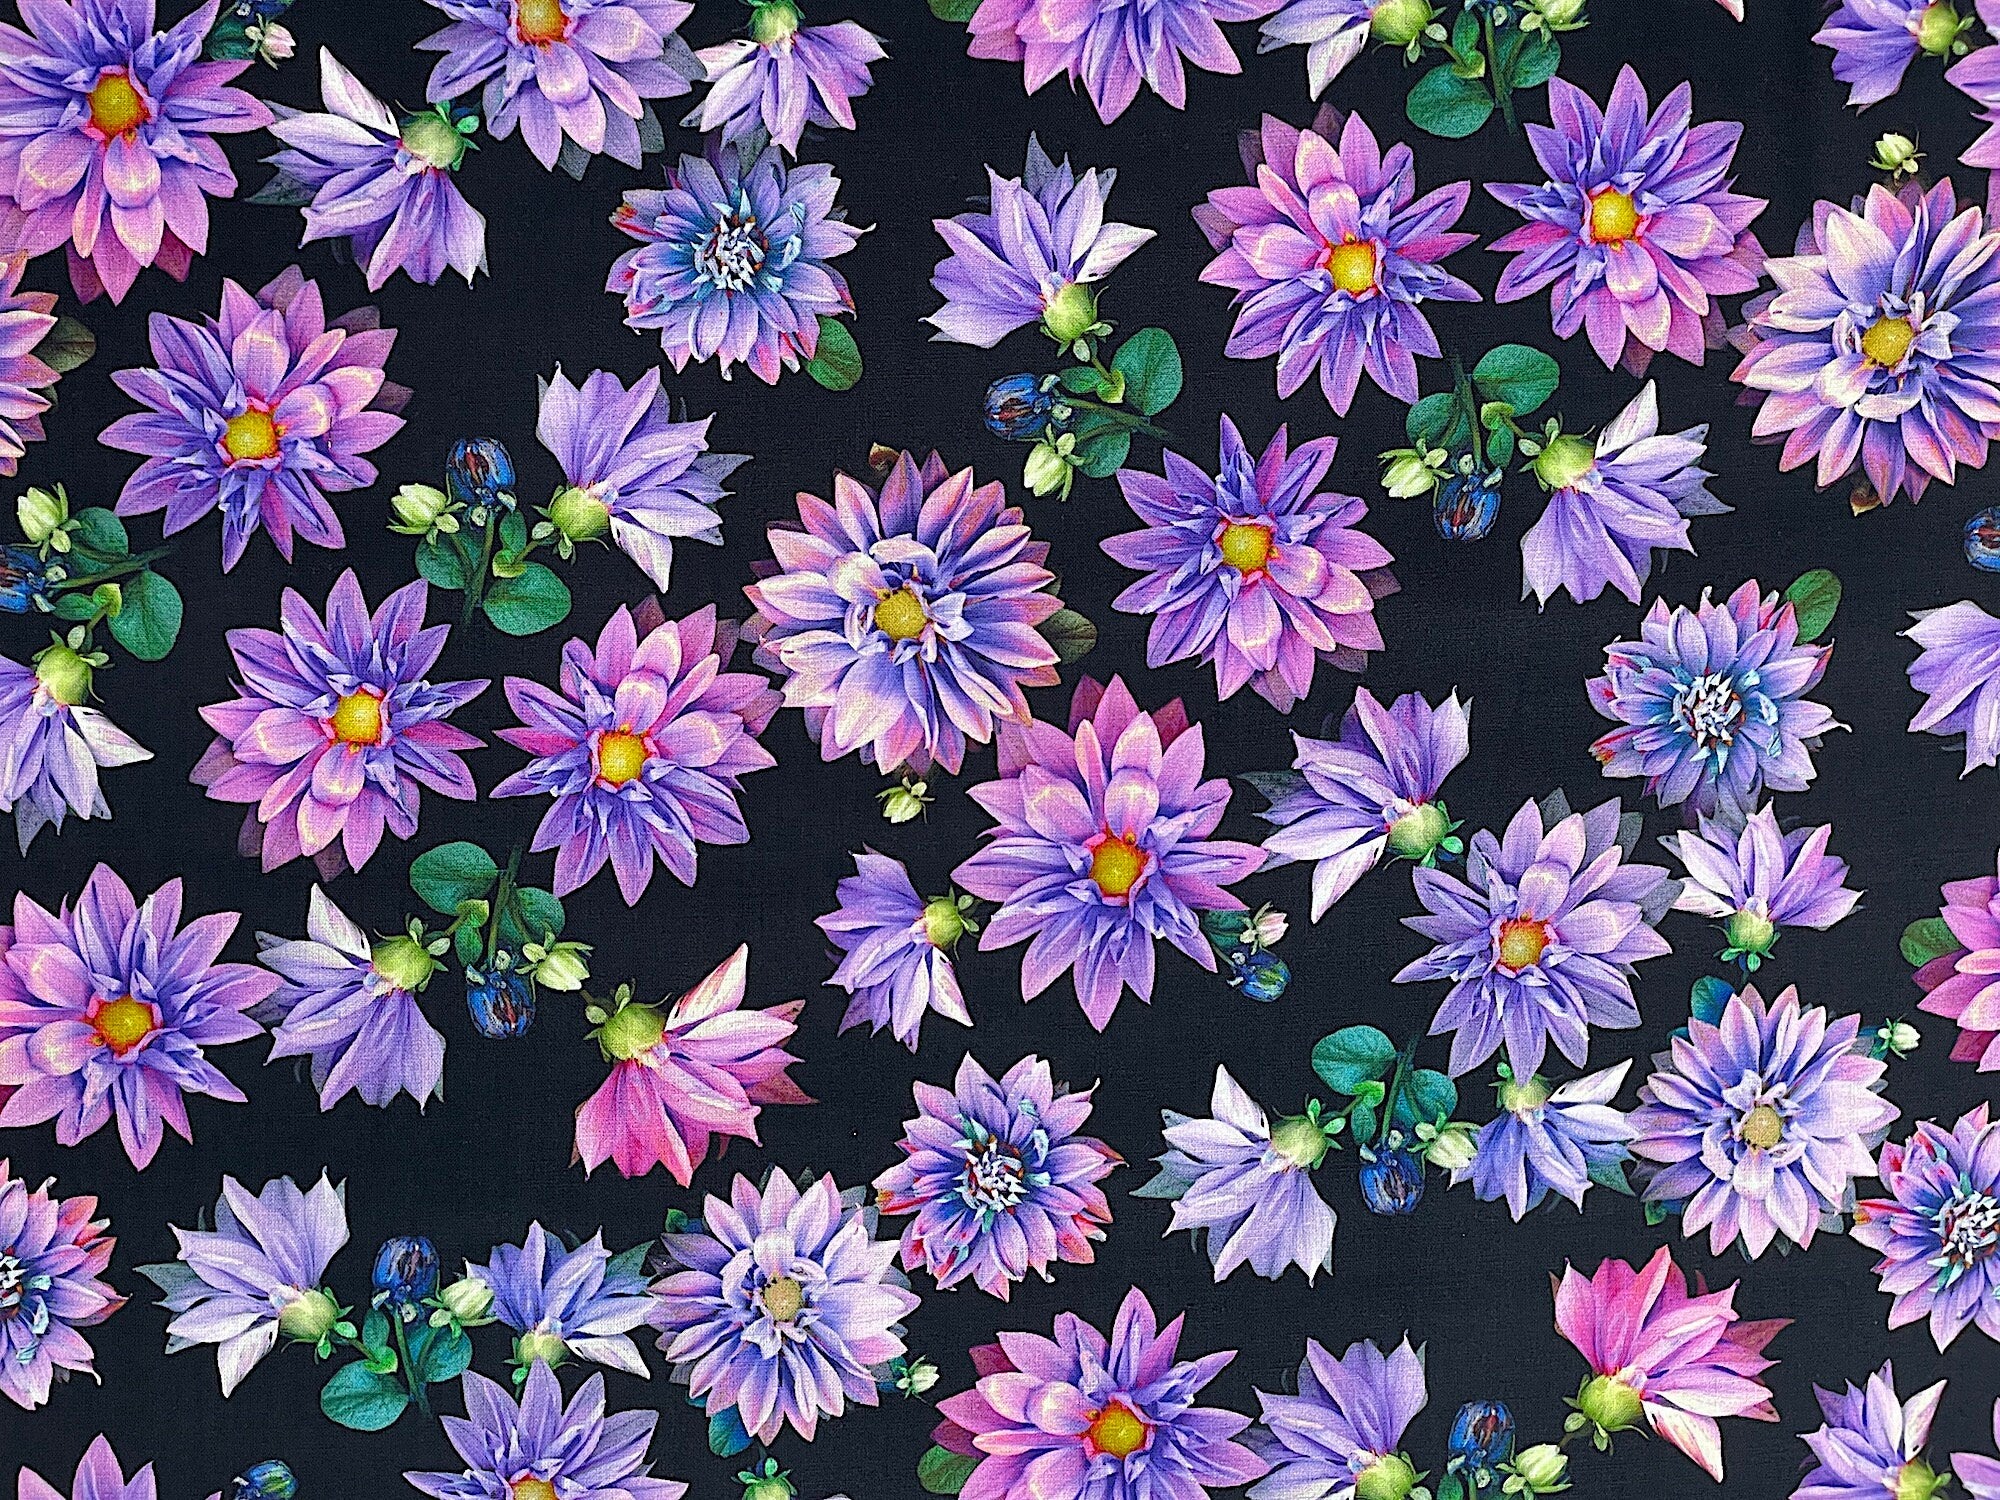 This black fabric is part of Tina's Garden collection by Tina Leto for Clothworks. This fabric is covered with dahlias in various shades of purple and green leaves